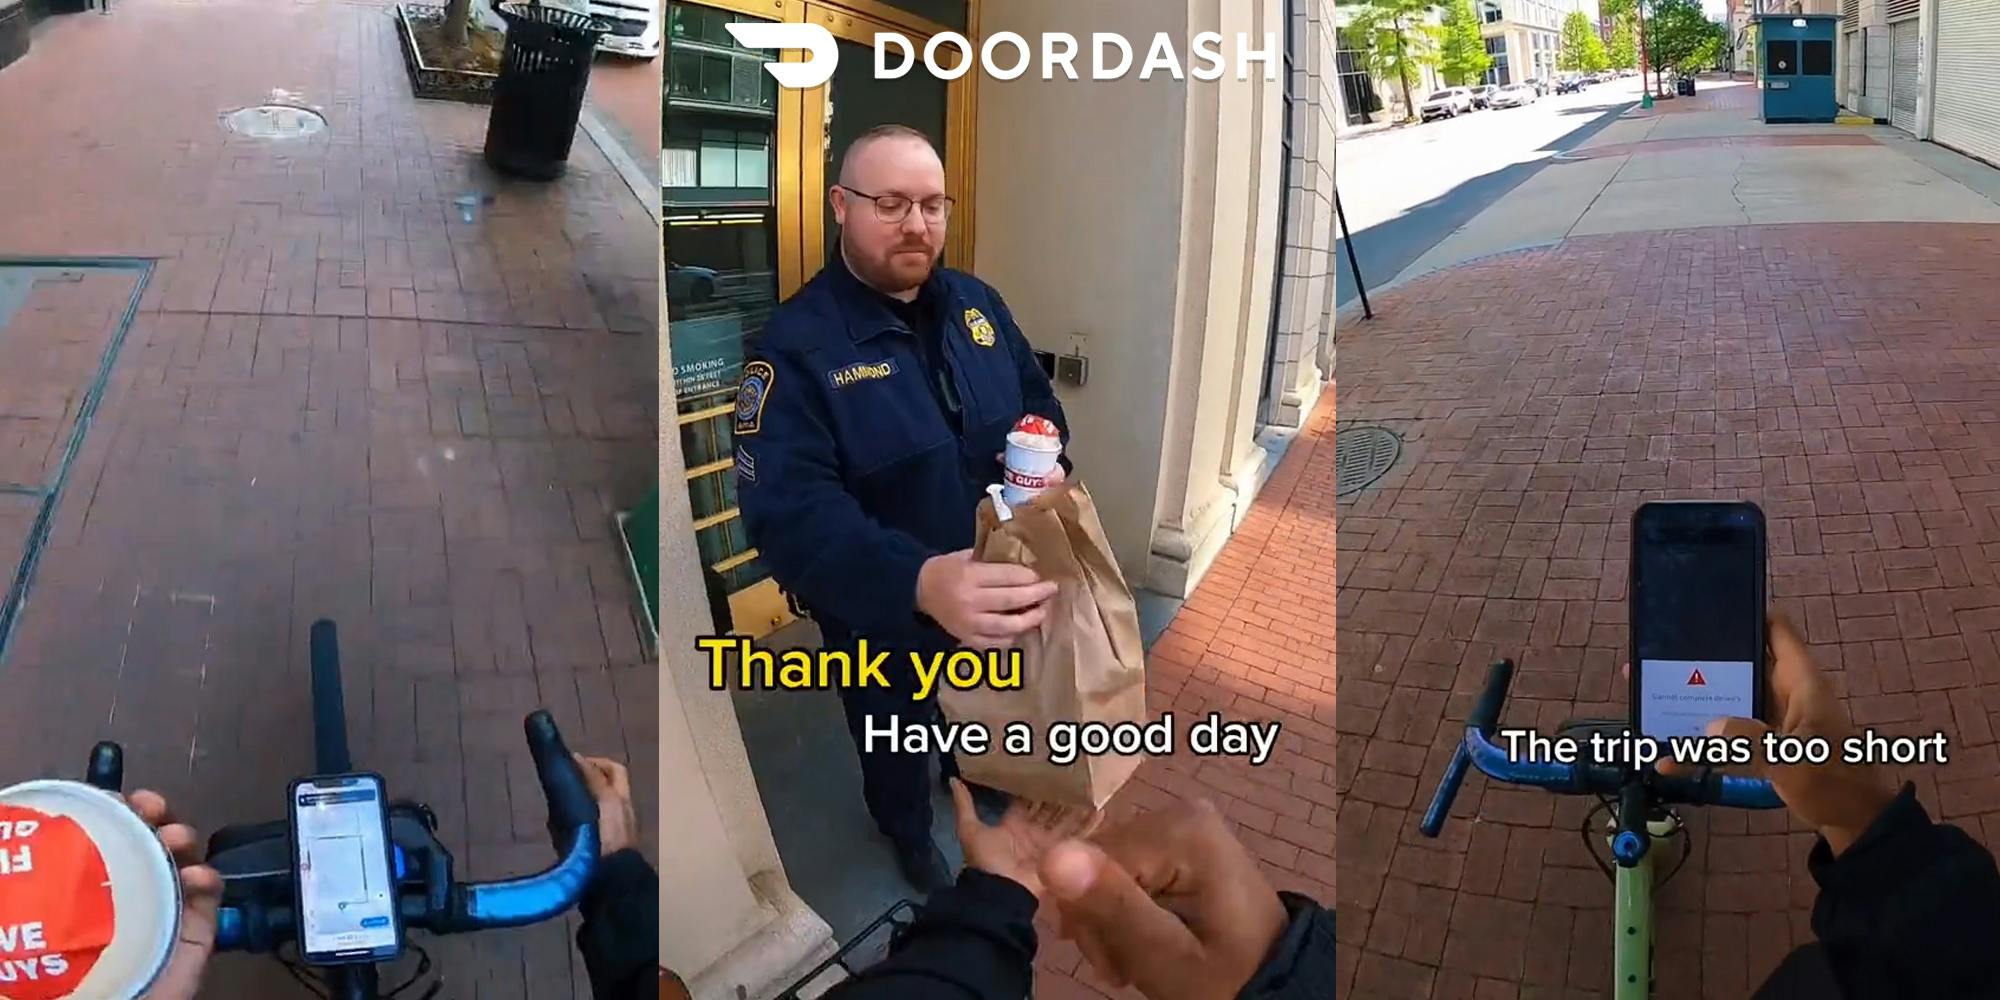 DoorDasher on bike delivering Five Guys (l) DoorDash customer receiving delivery with caption "Thank you Have a good day" with DoorDash logo above (c) DoorDasher on bike using DoorDash app on phone with caption "The trip was too short" (r)